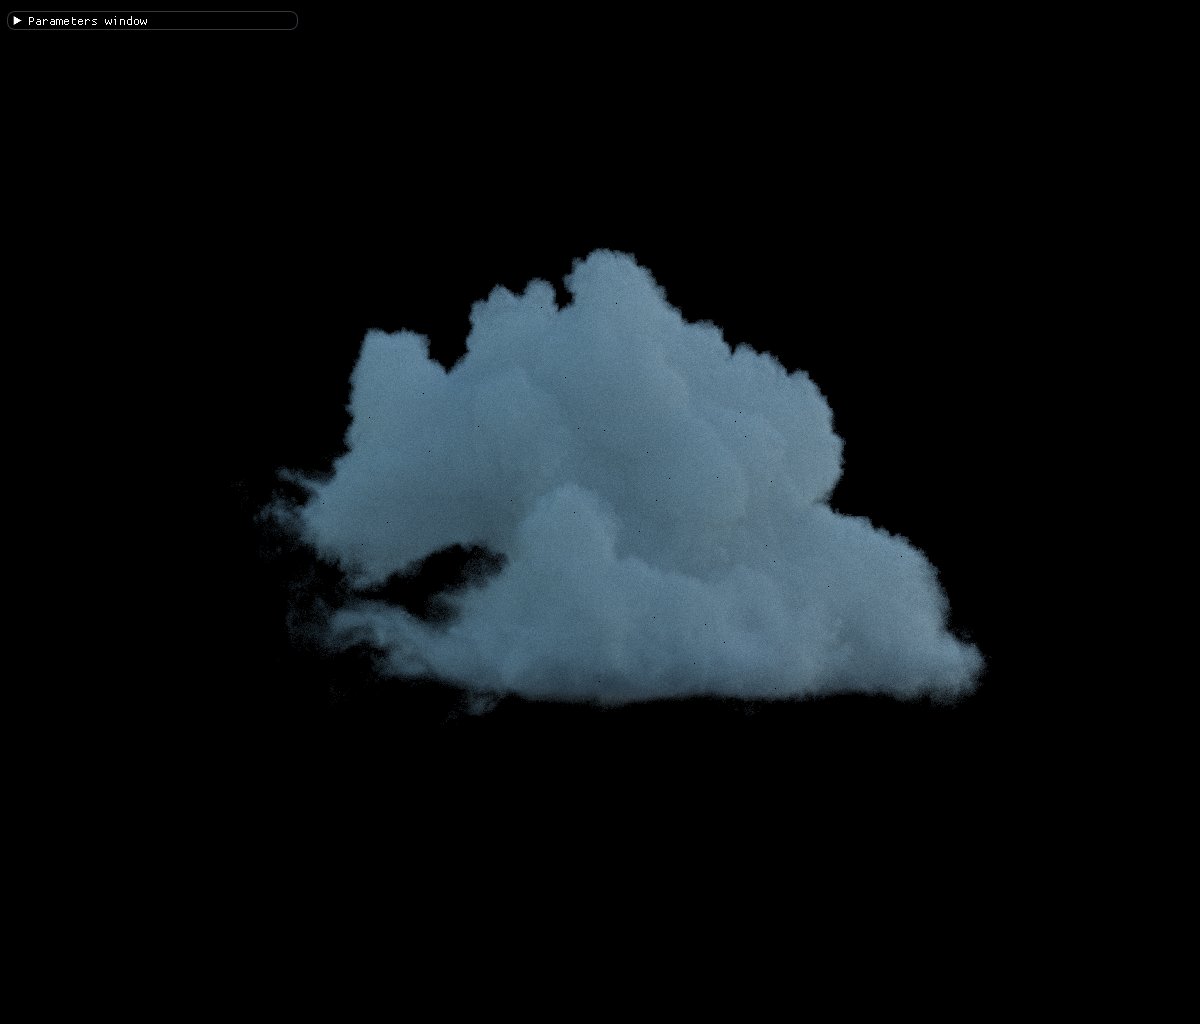 Cloud rendered with sky light only.
100 ray depth, 100 spp, isotropic phase function ~10m, tr depth 2.0